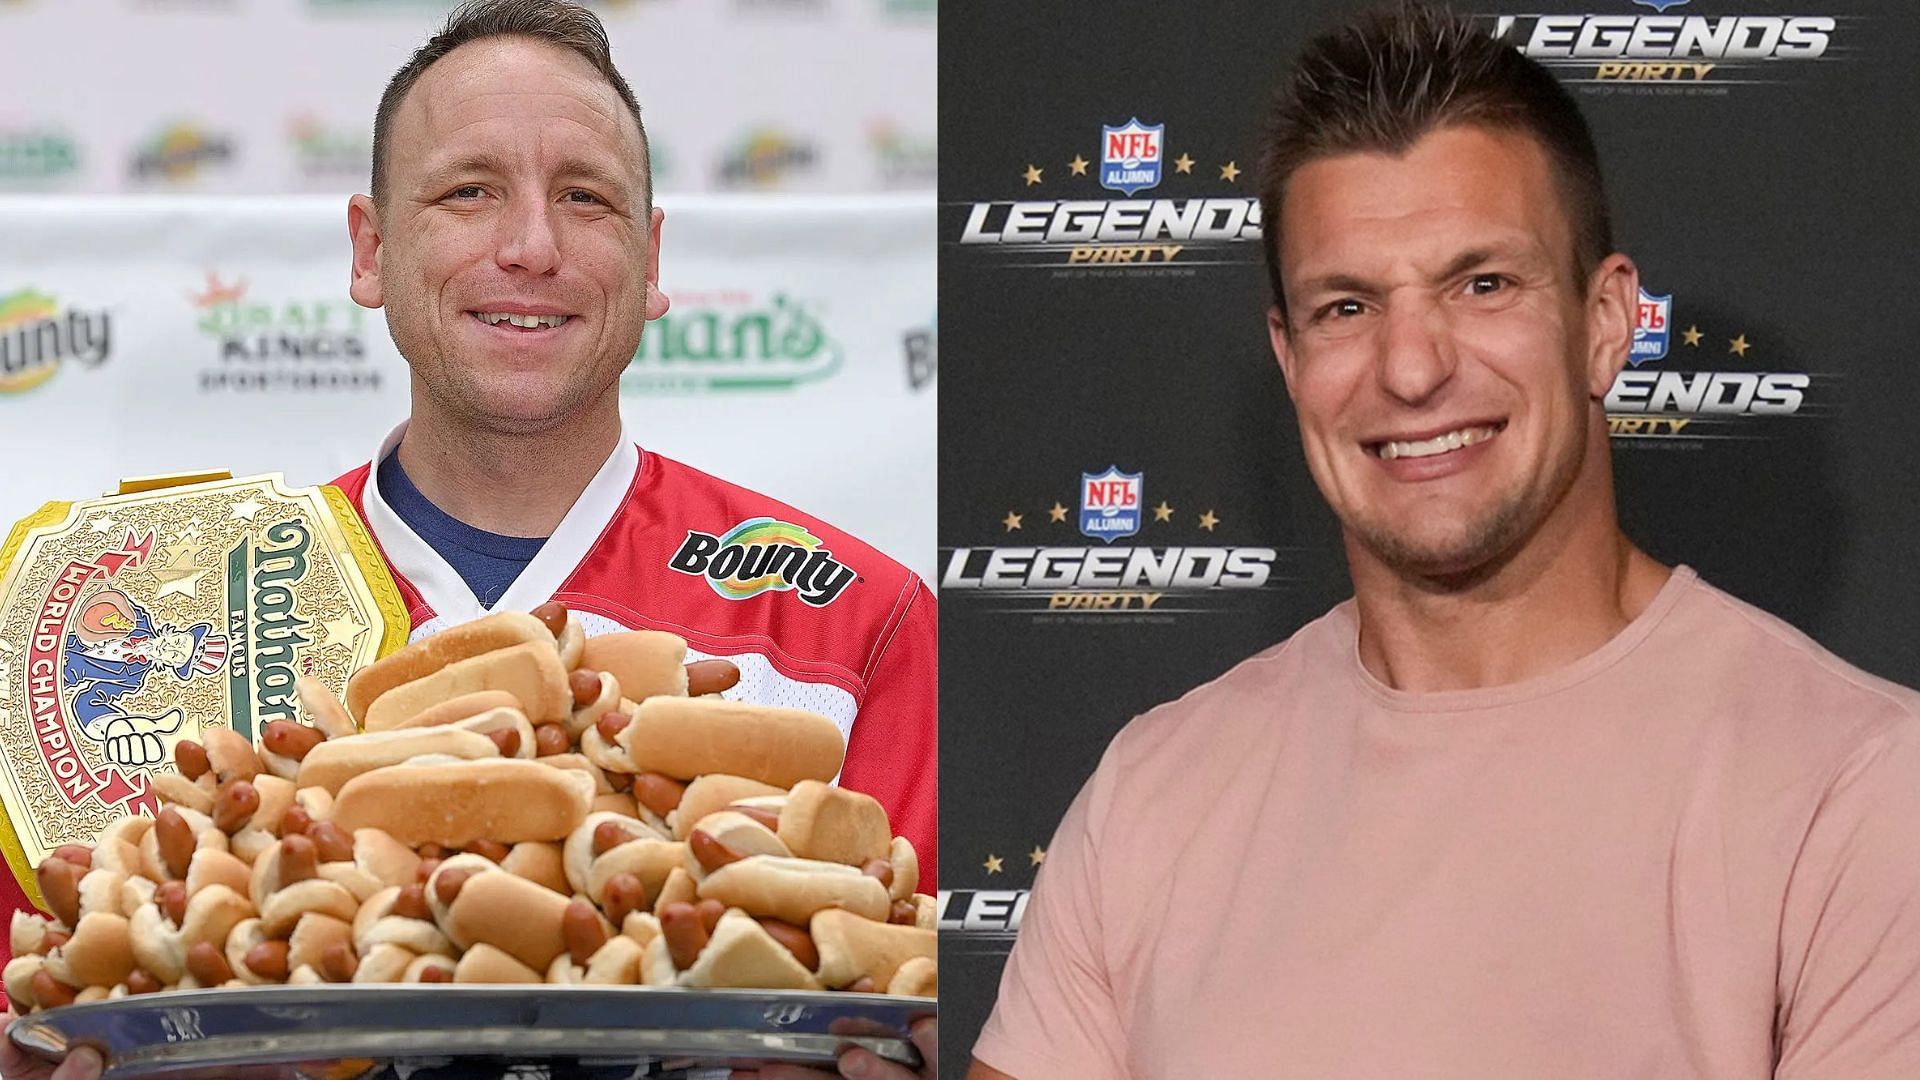 Hot dog champion Joey Chestnut (L) on facing NFL great Rob Gronkowski (R) and his family